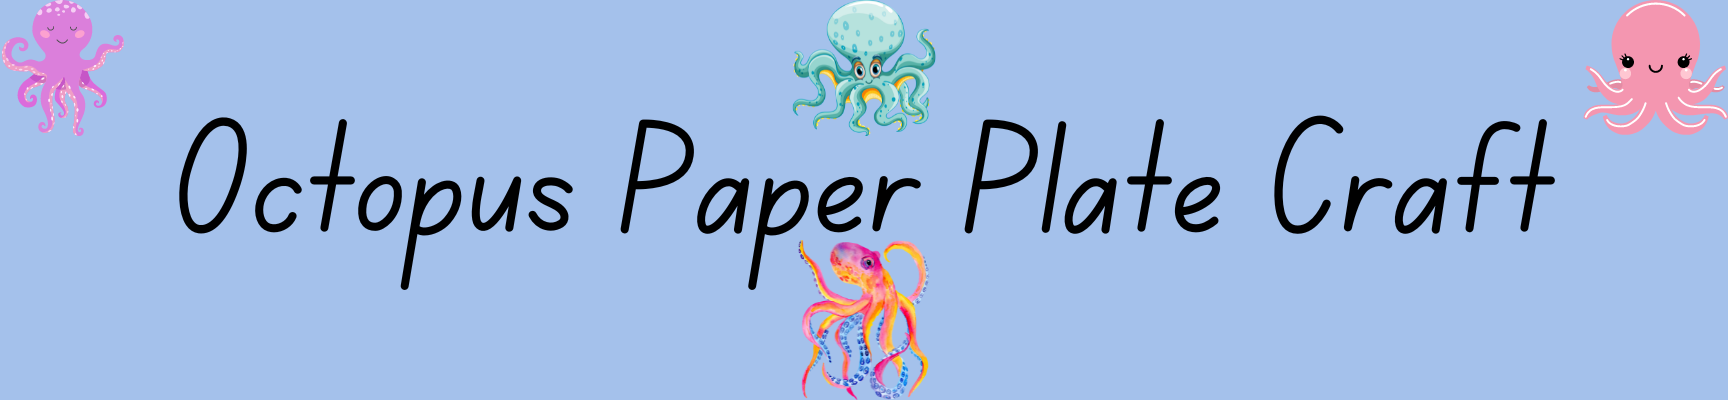 How to Create an Octopus Paper Plate Craft